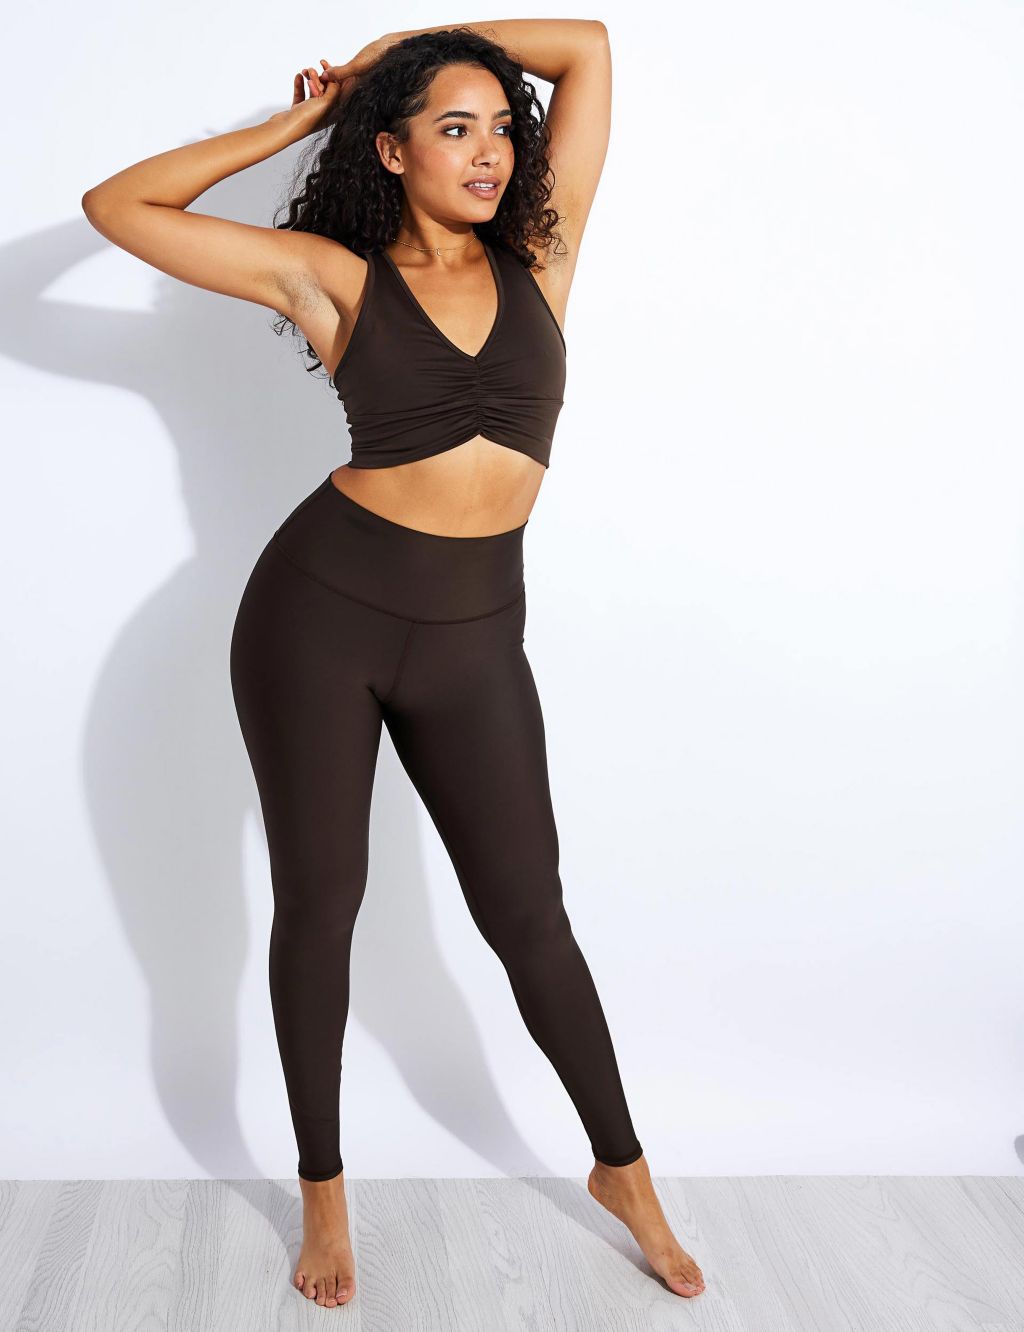 ALO YOGA Airlift All Access cutout stretch leggings